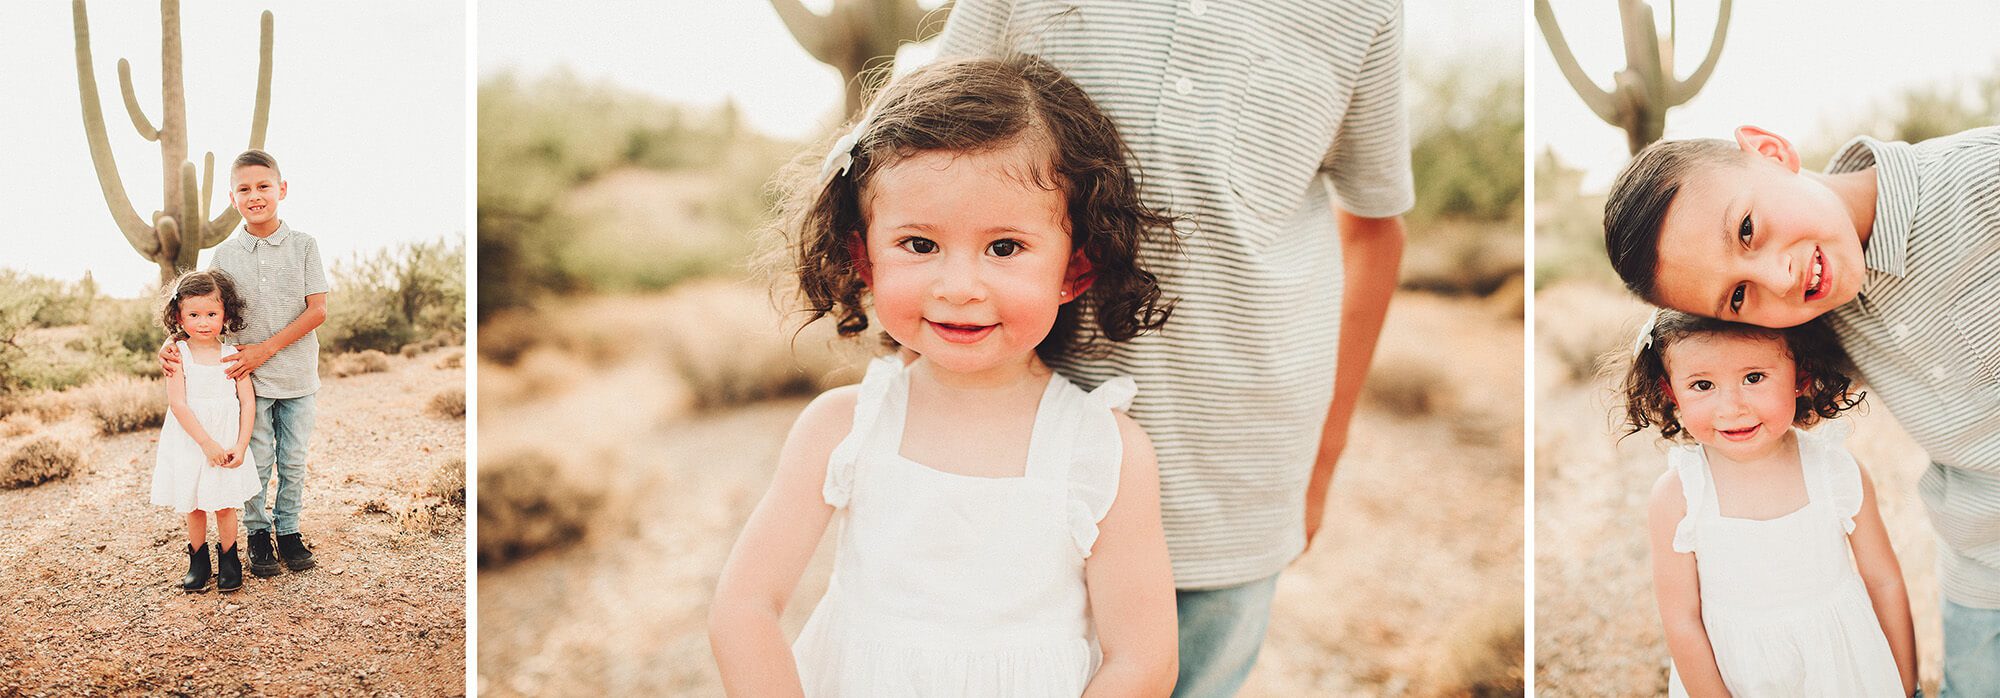 This darling little girl was a peach during this family session celebrating her second birthday.